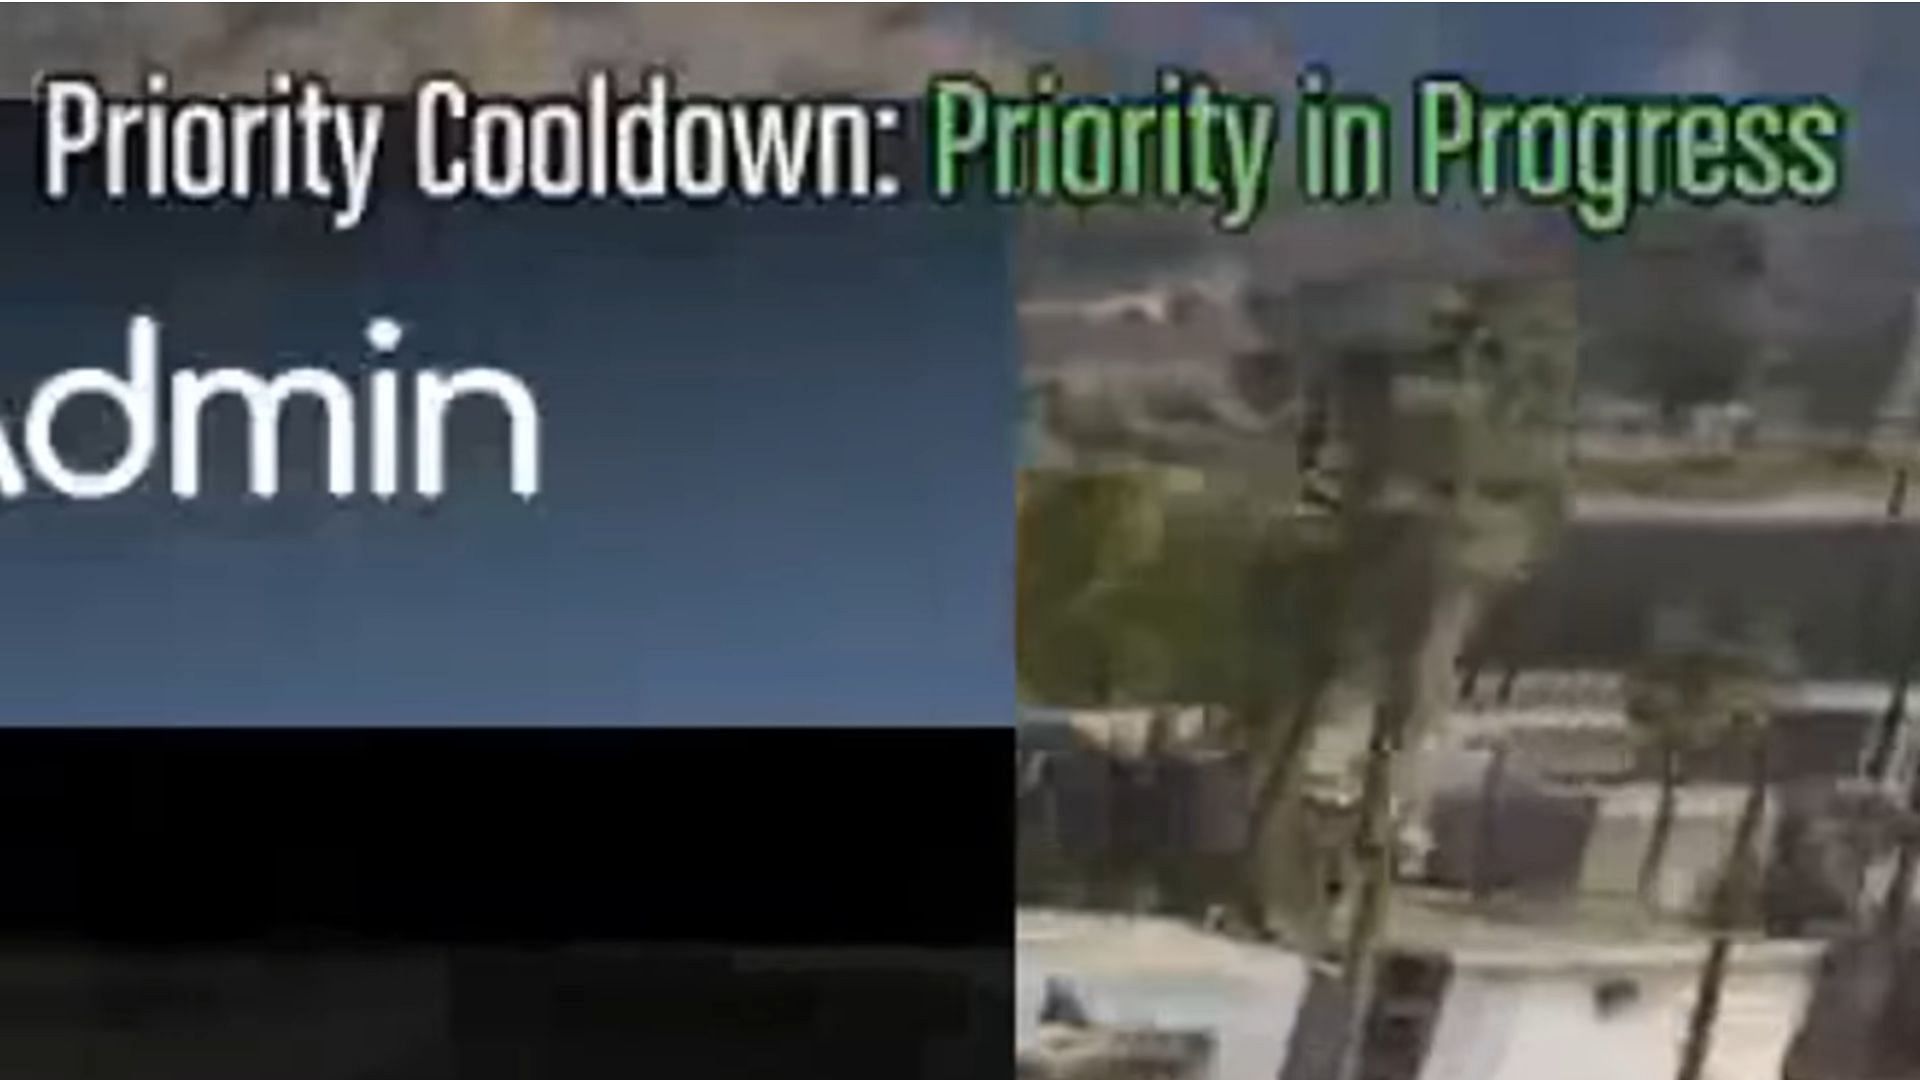 An example of Priority in Progress (Image via Breach27 / YouTube)